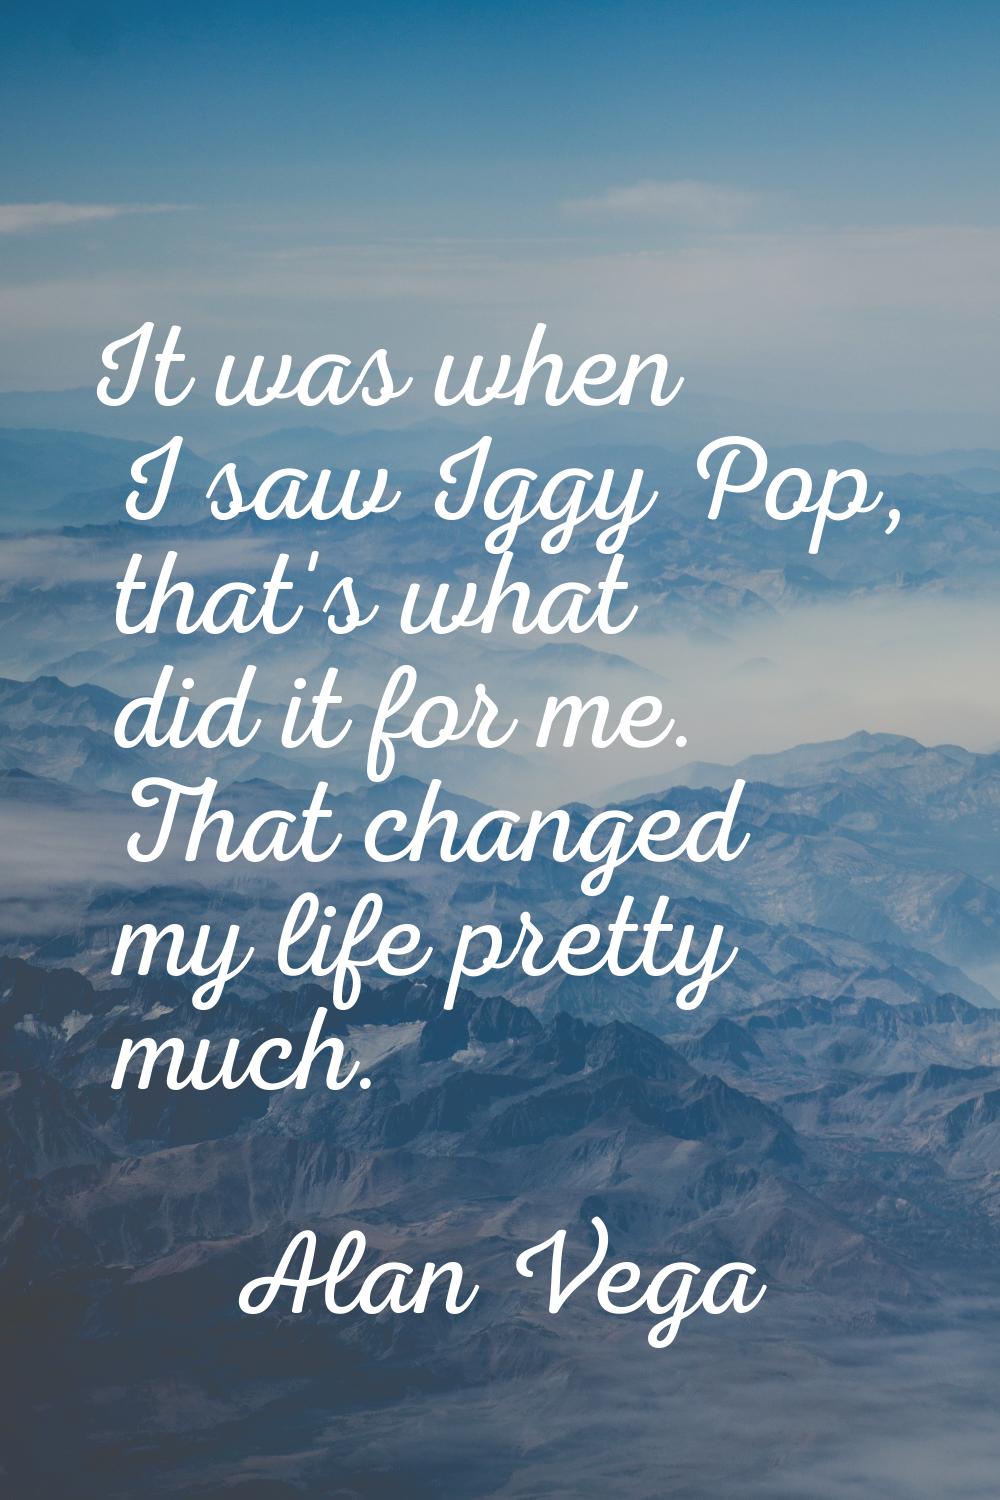 It was when I saw Iggy Pop, that's what did it for me. That changed my life pretty much.